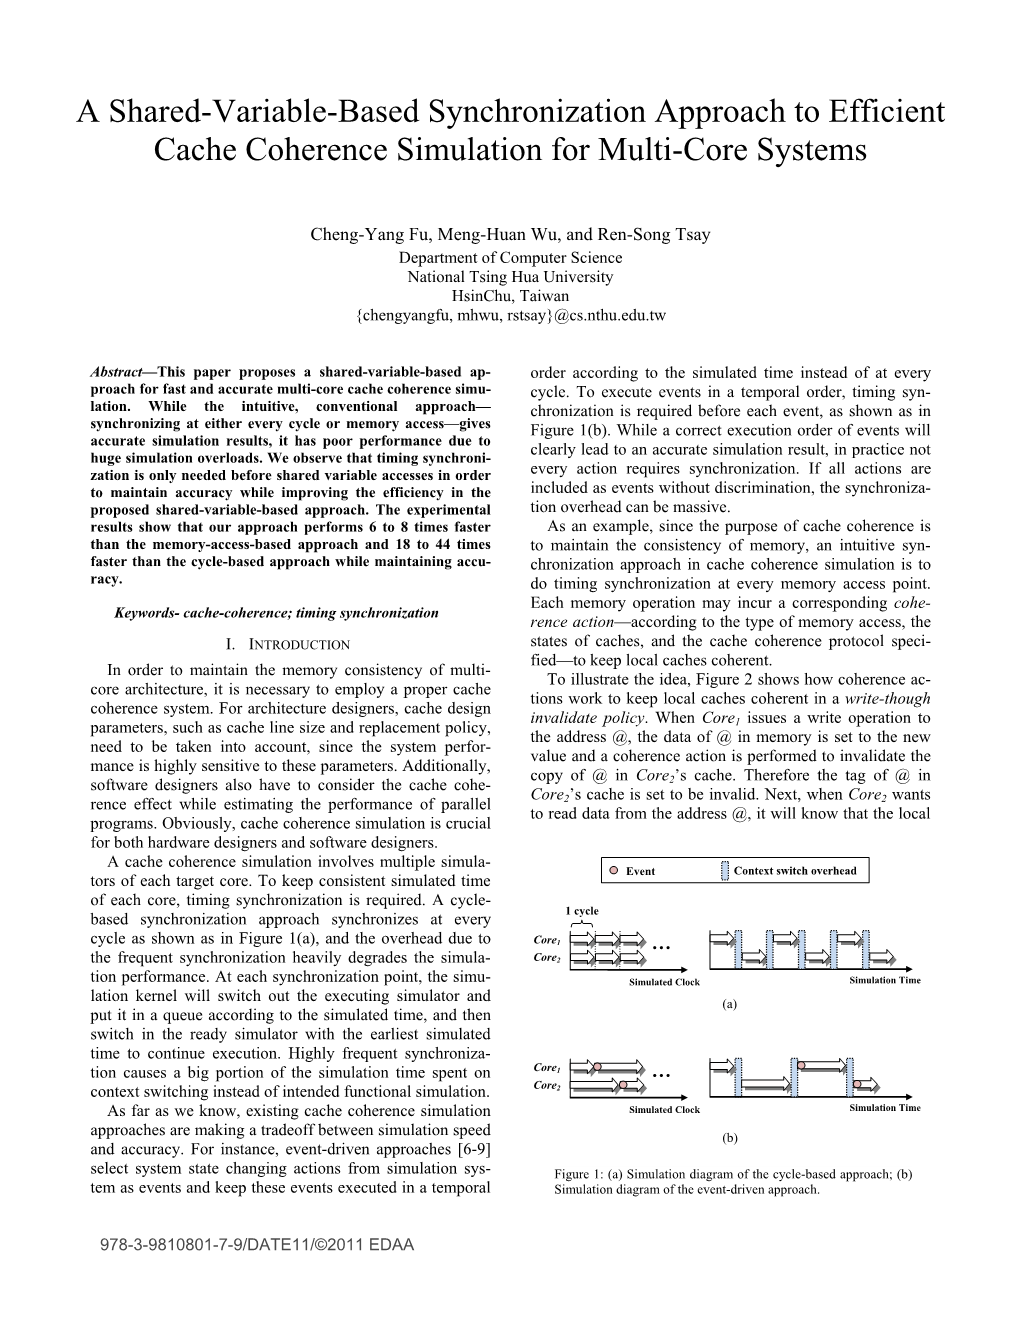 A Shared-Variable-Based Synchronization Approach to Efficient Cache Coherence Simulation for Multi-Core Systems